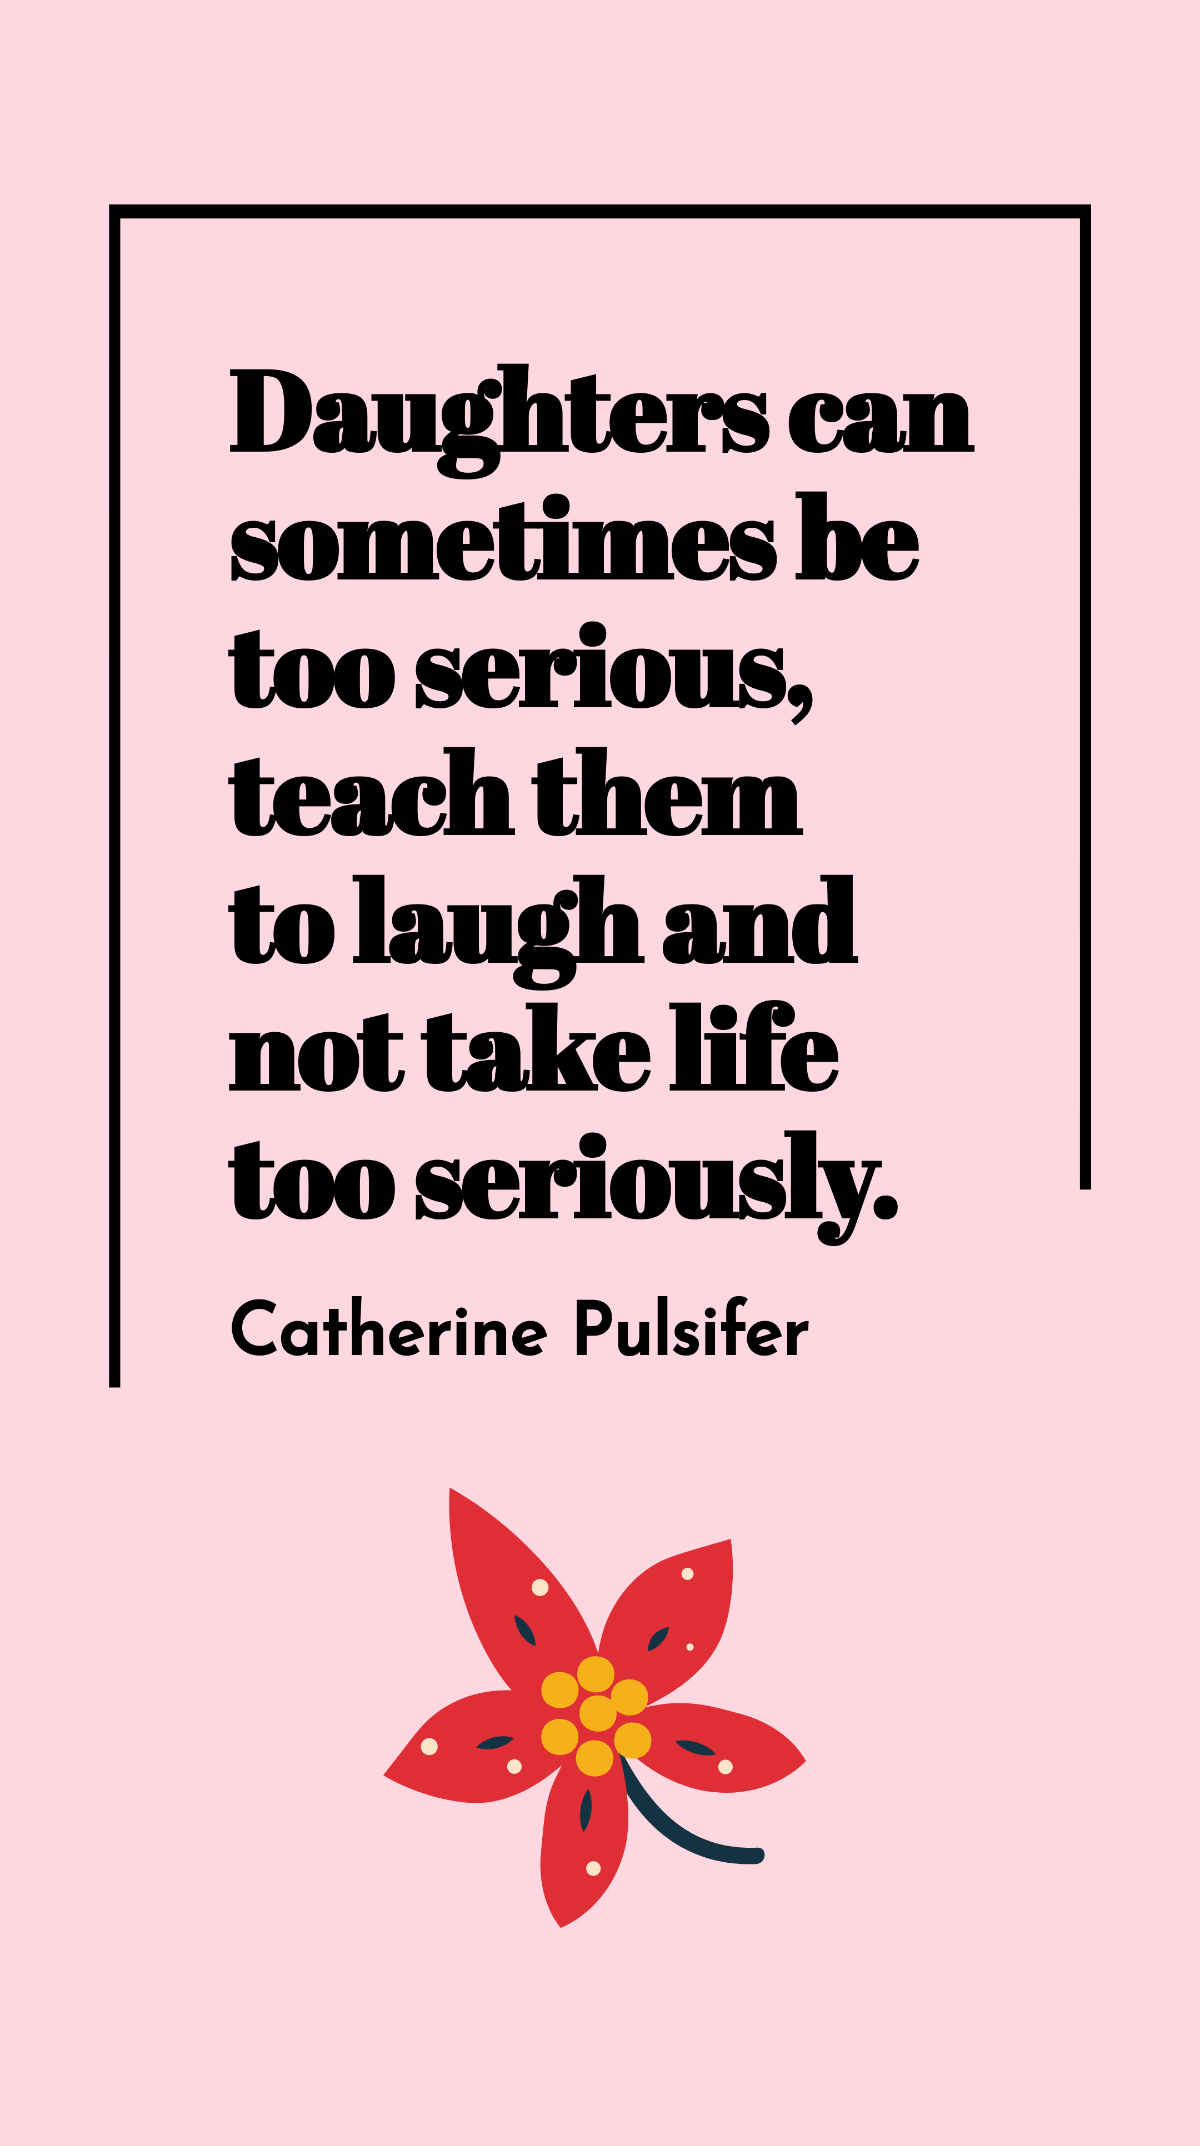 Catherine Pulsifer - Daughters can sometimes be too serious, teach them to laugh and not take life too seriously. Template